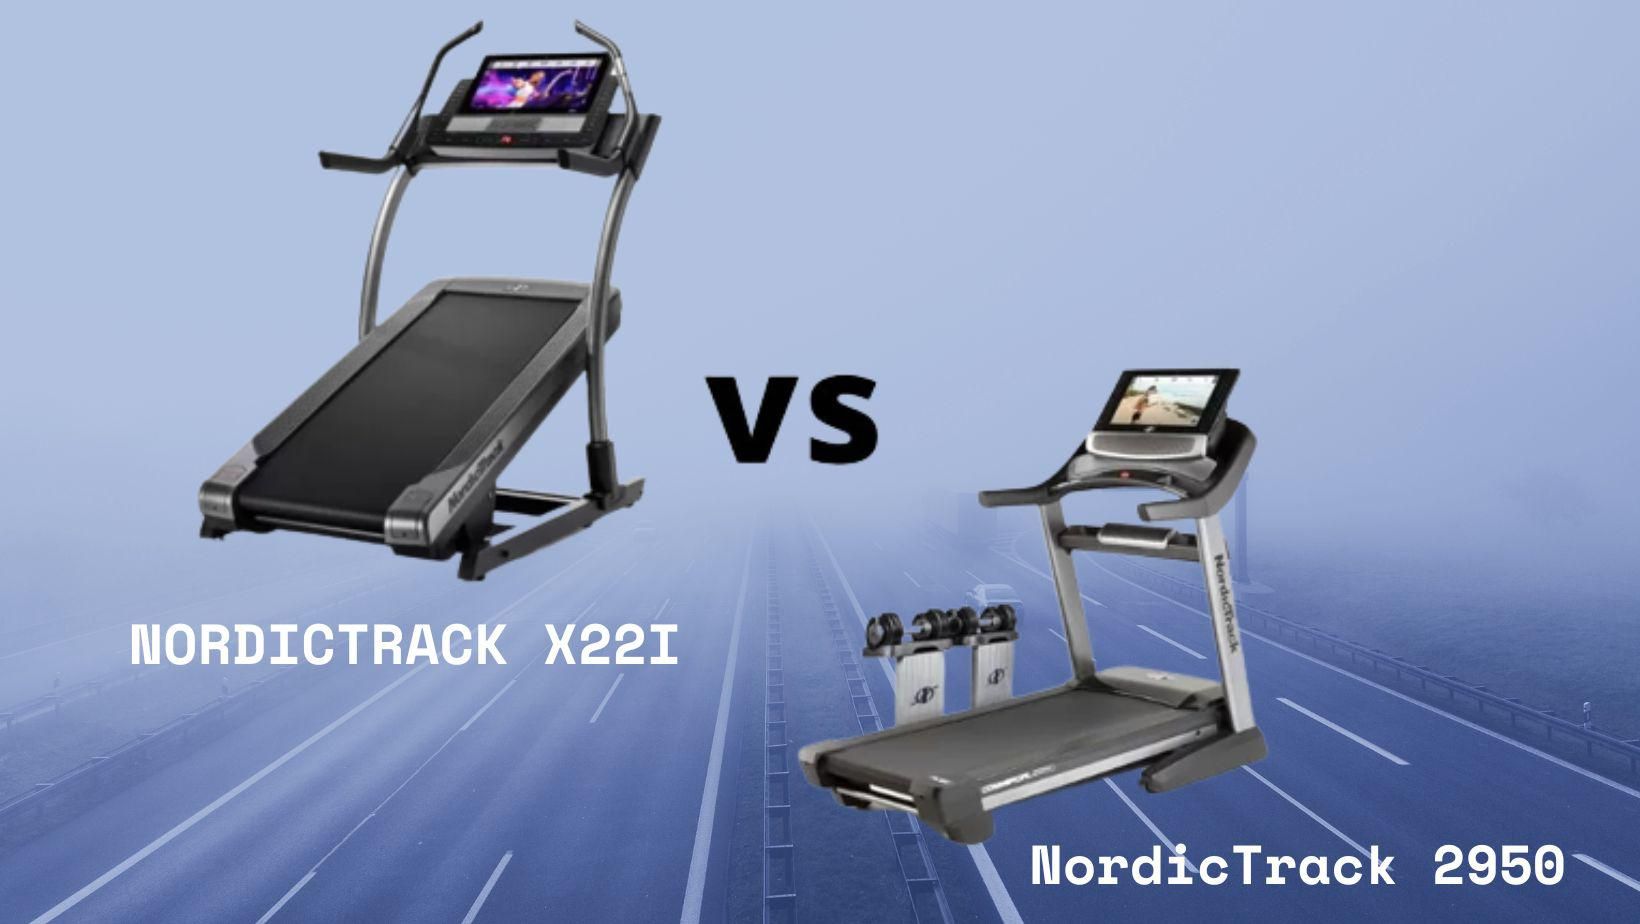 NordicTrack 2950 vs x22i-Guess the better one!